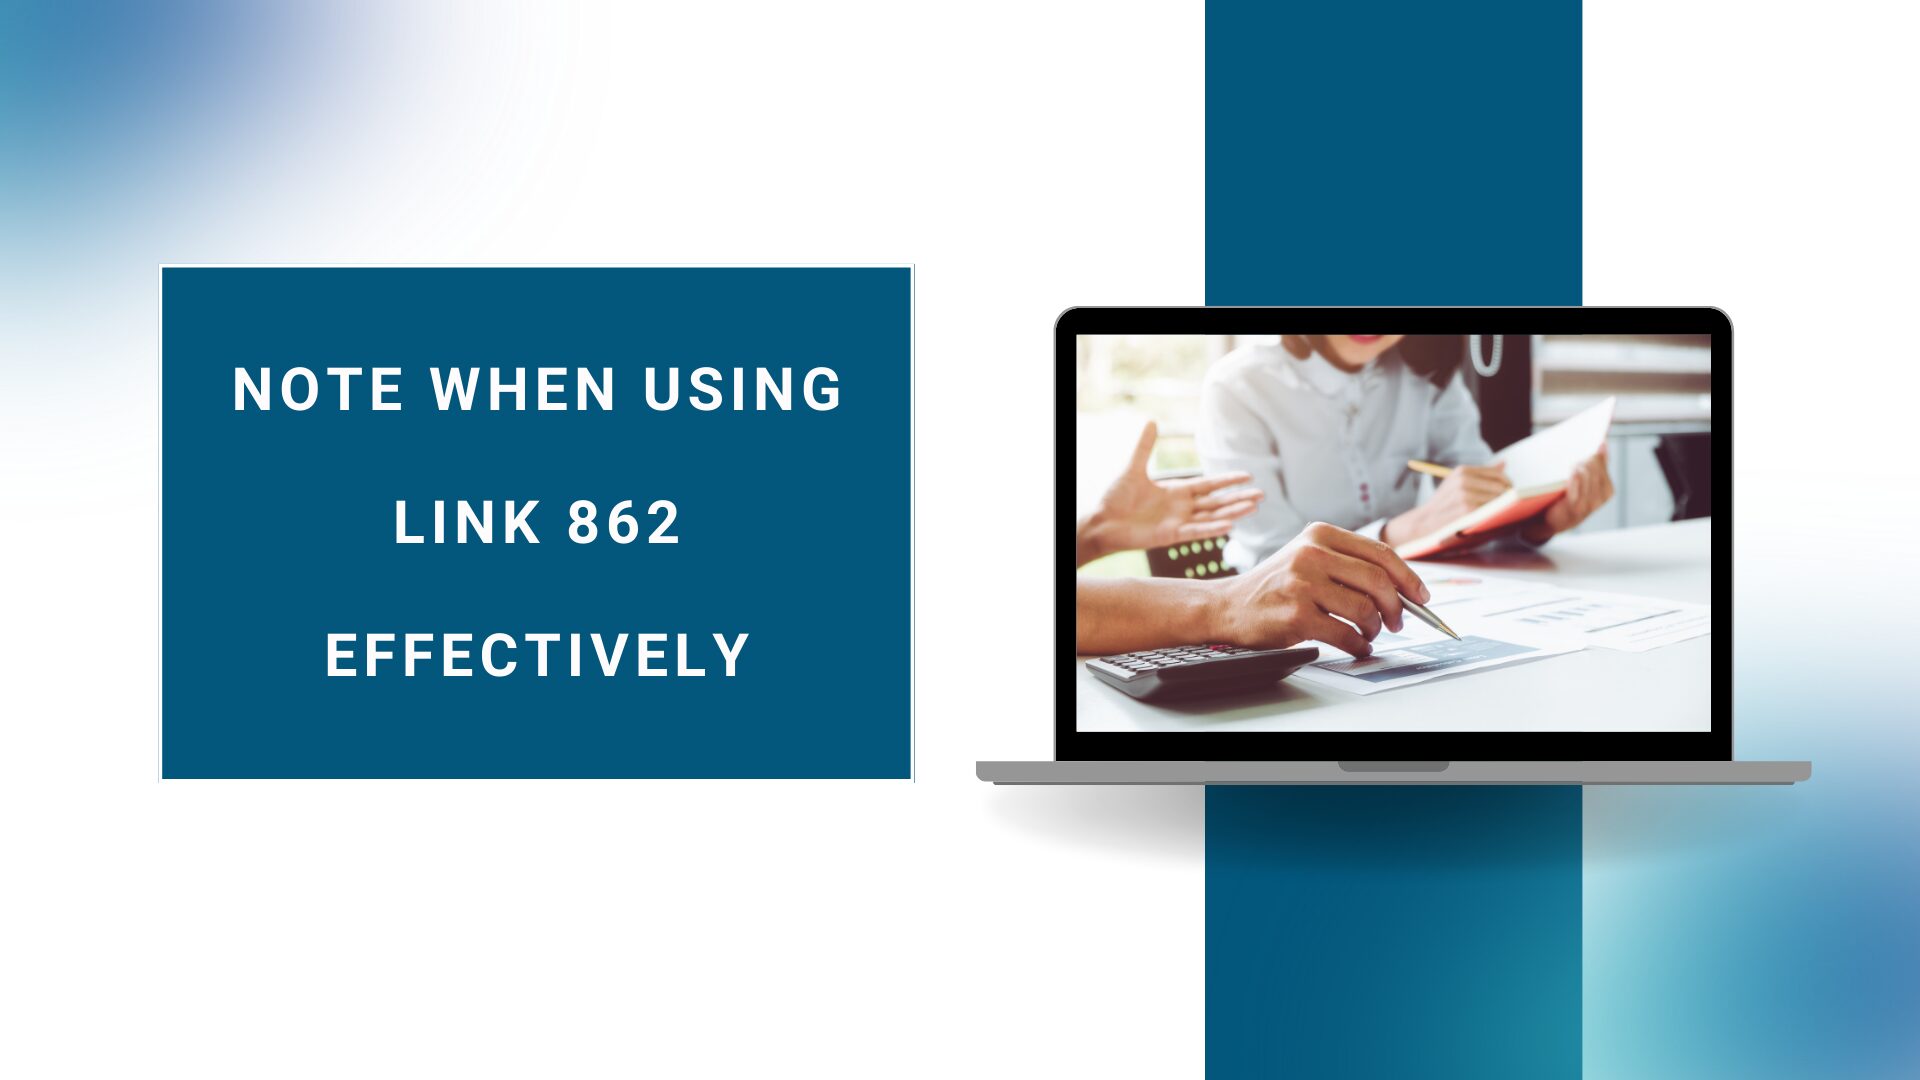 Note when using Link 862 effectively